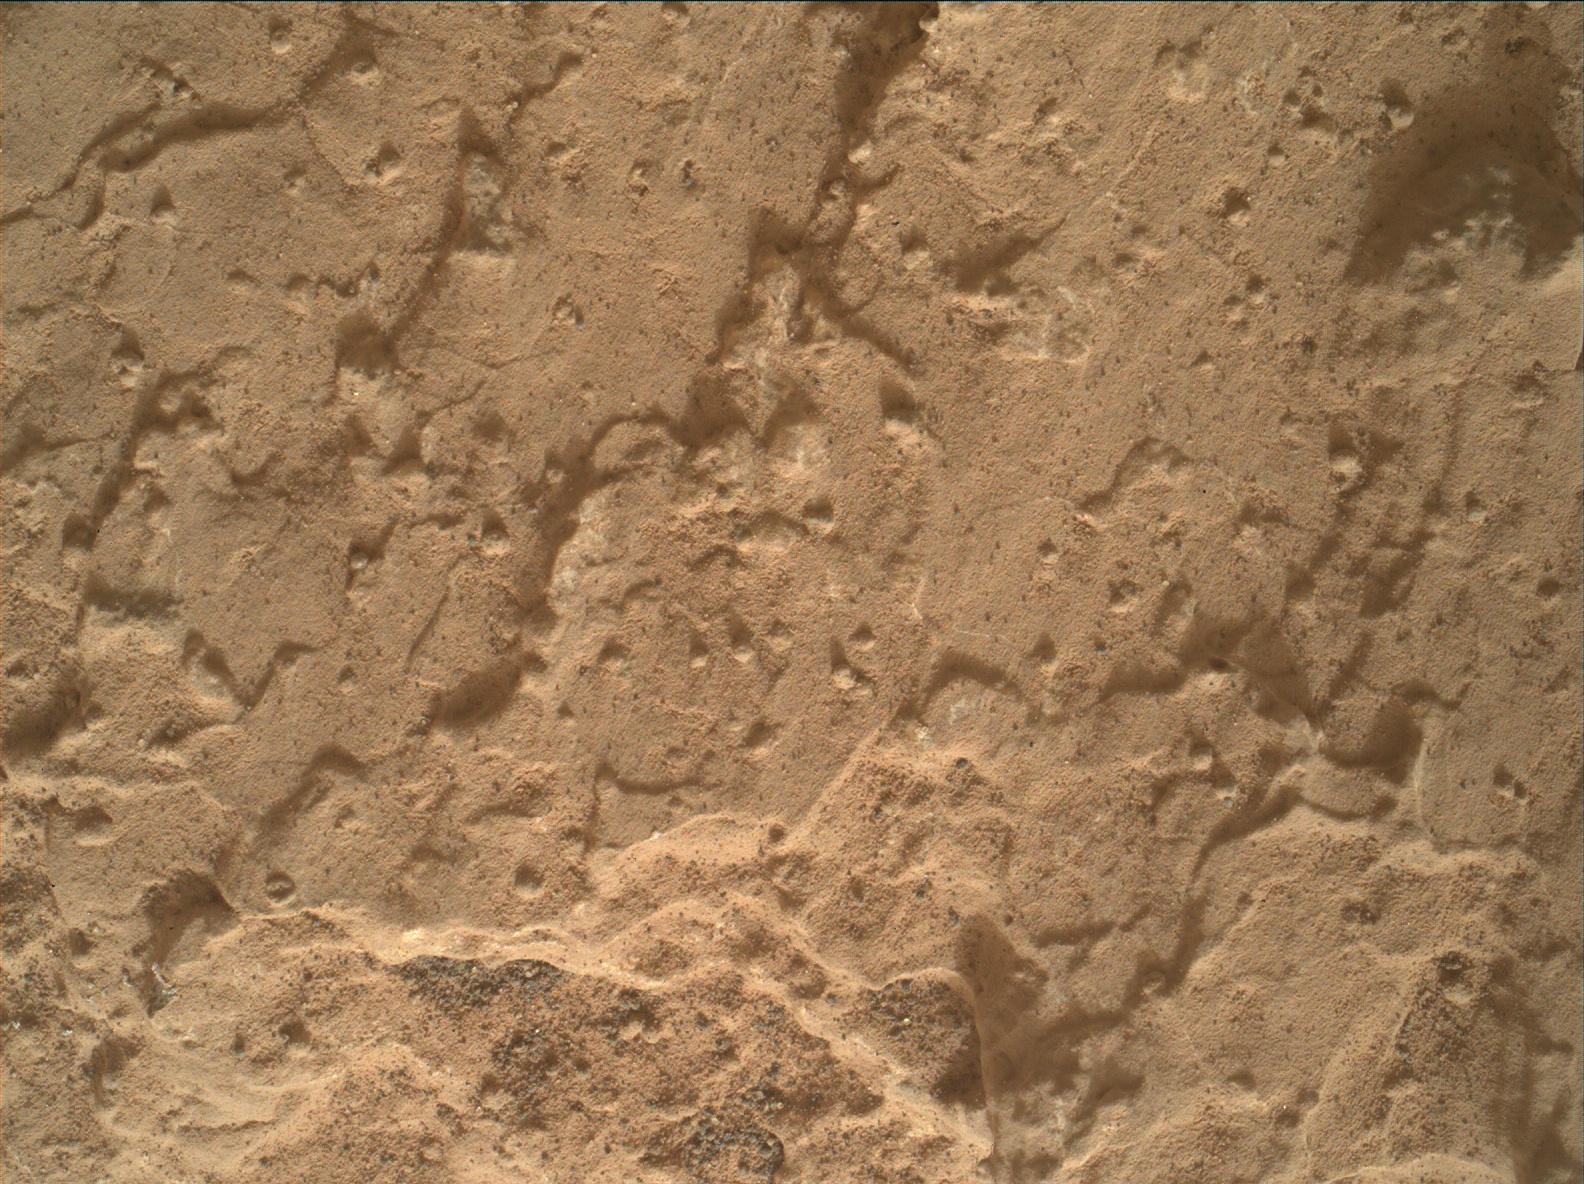 Nasa's Mars rover Curiosity acquired this image using its Mars Hand Lens Imager (MAHLI) on Sol 2804